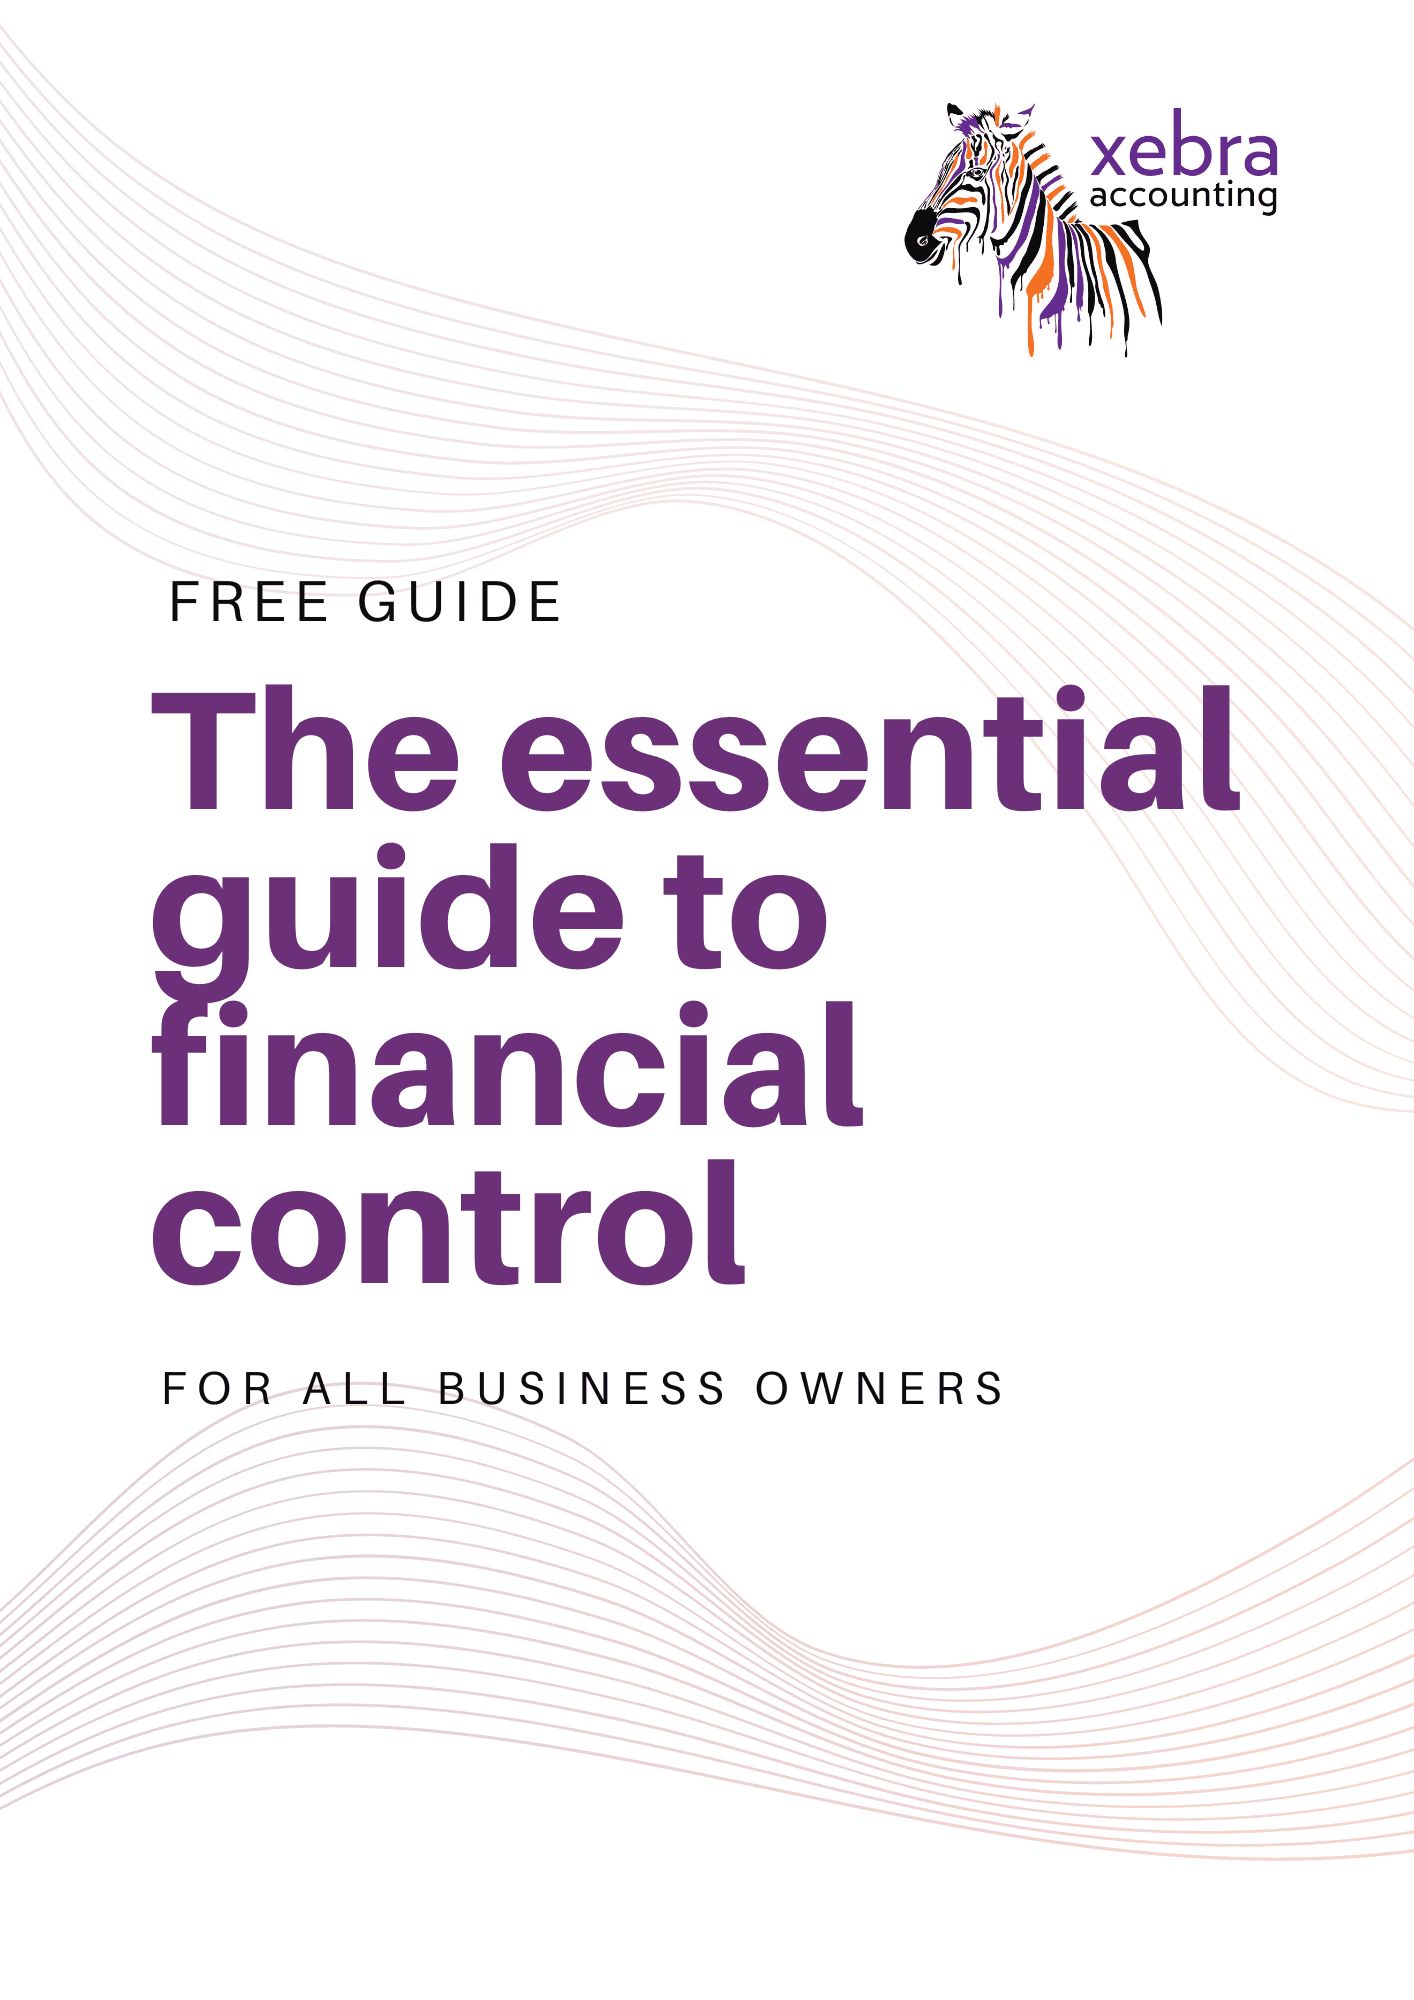 Xebra Accounting | Guides & Templates | The Essential Guide to Financial Control